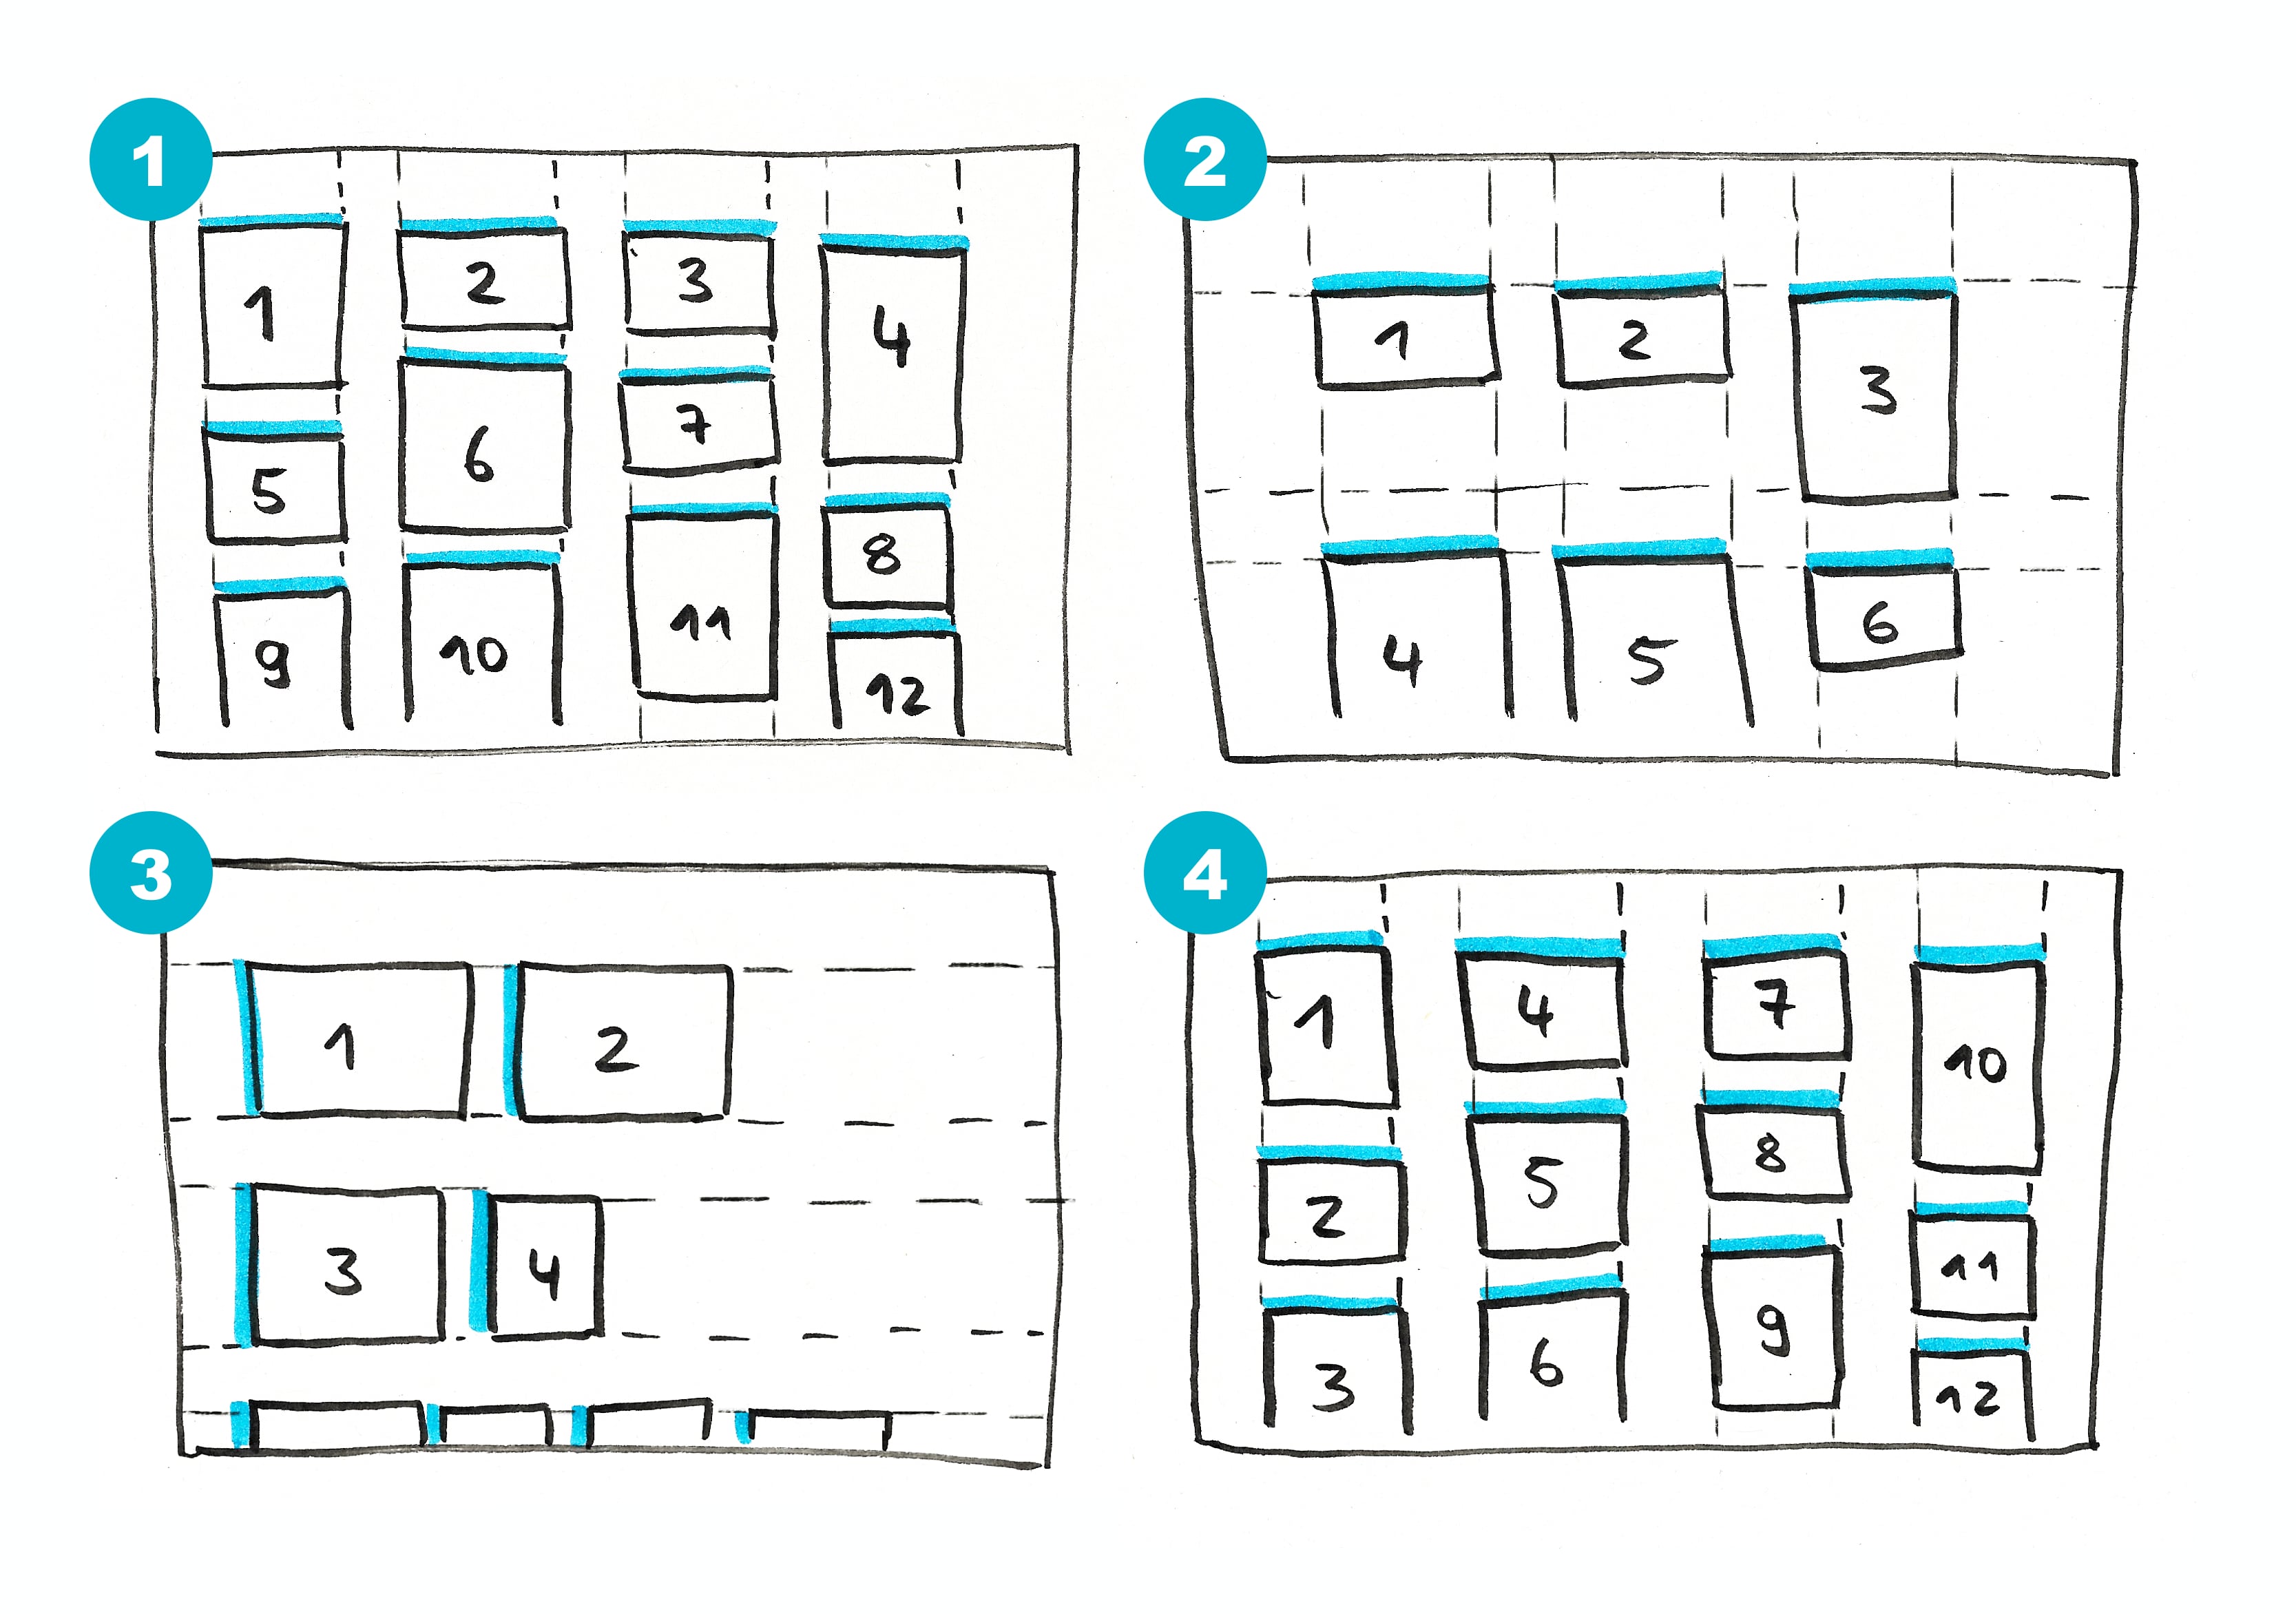 Four possible list layouts